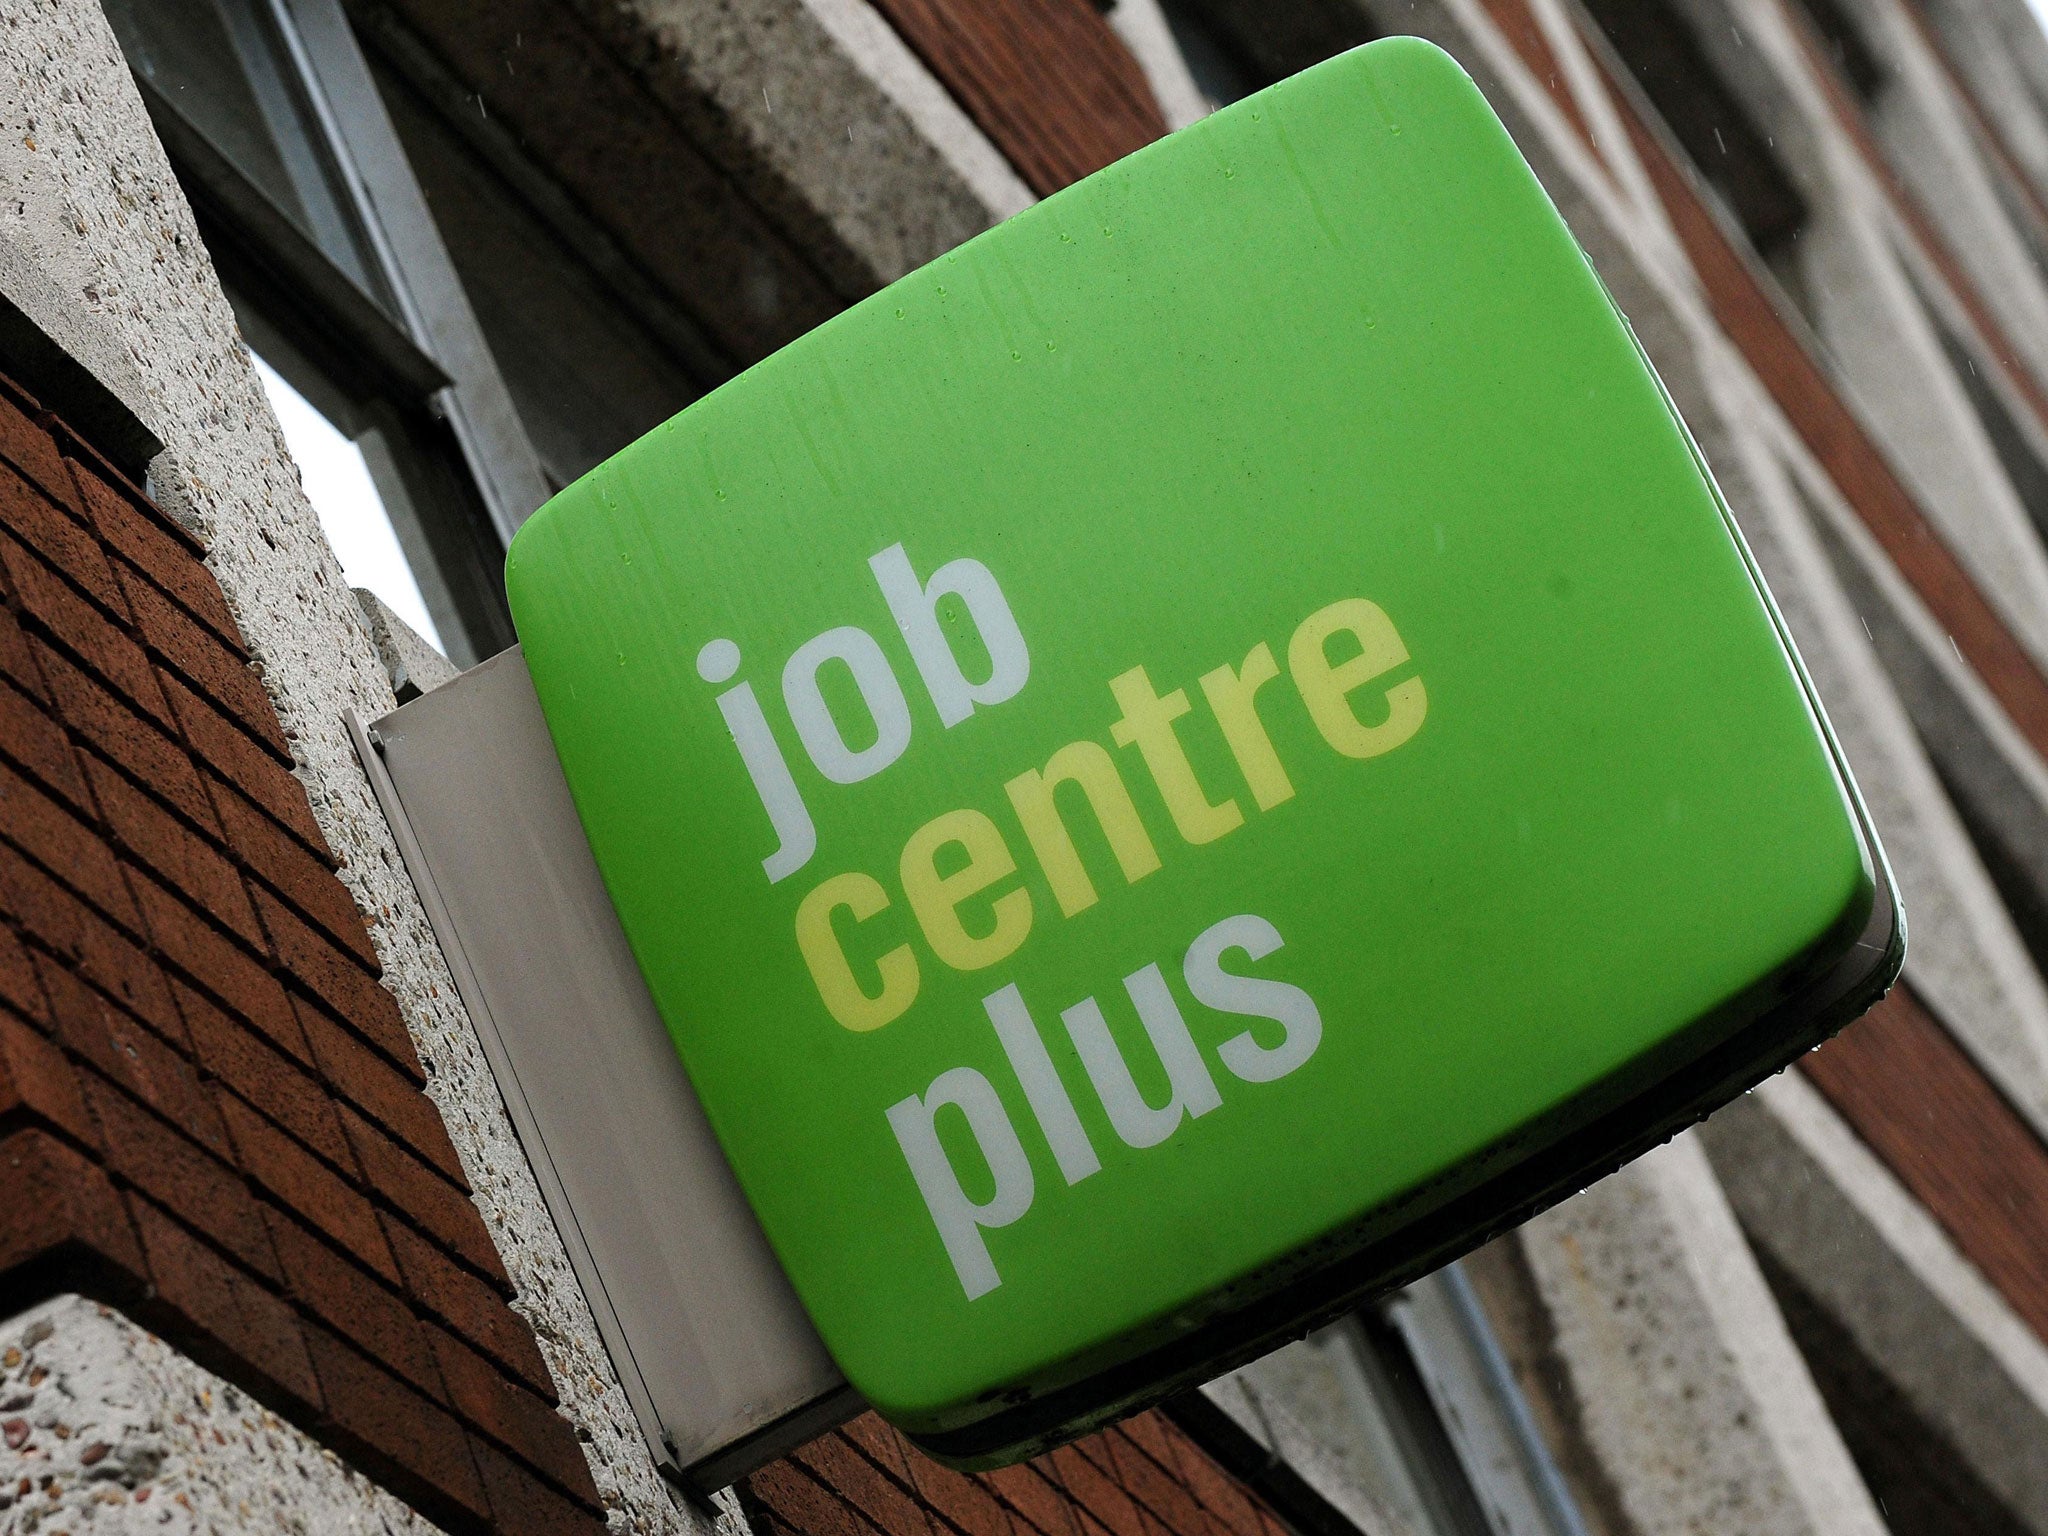 Unemployed people will have to produce a CV before they claim benefits